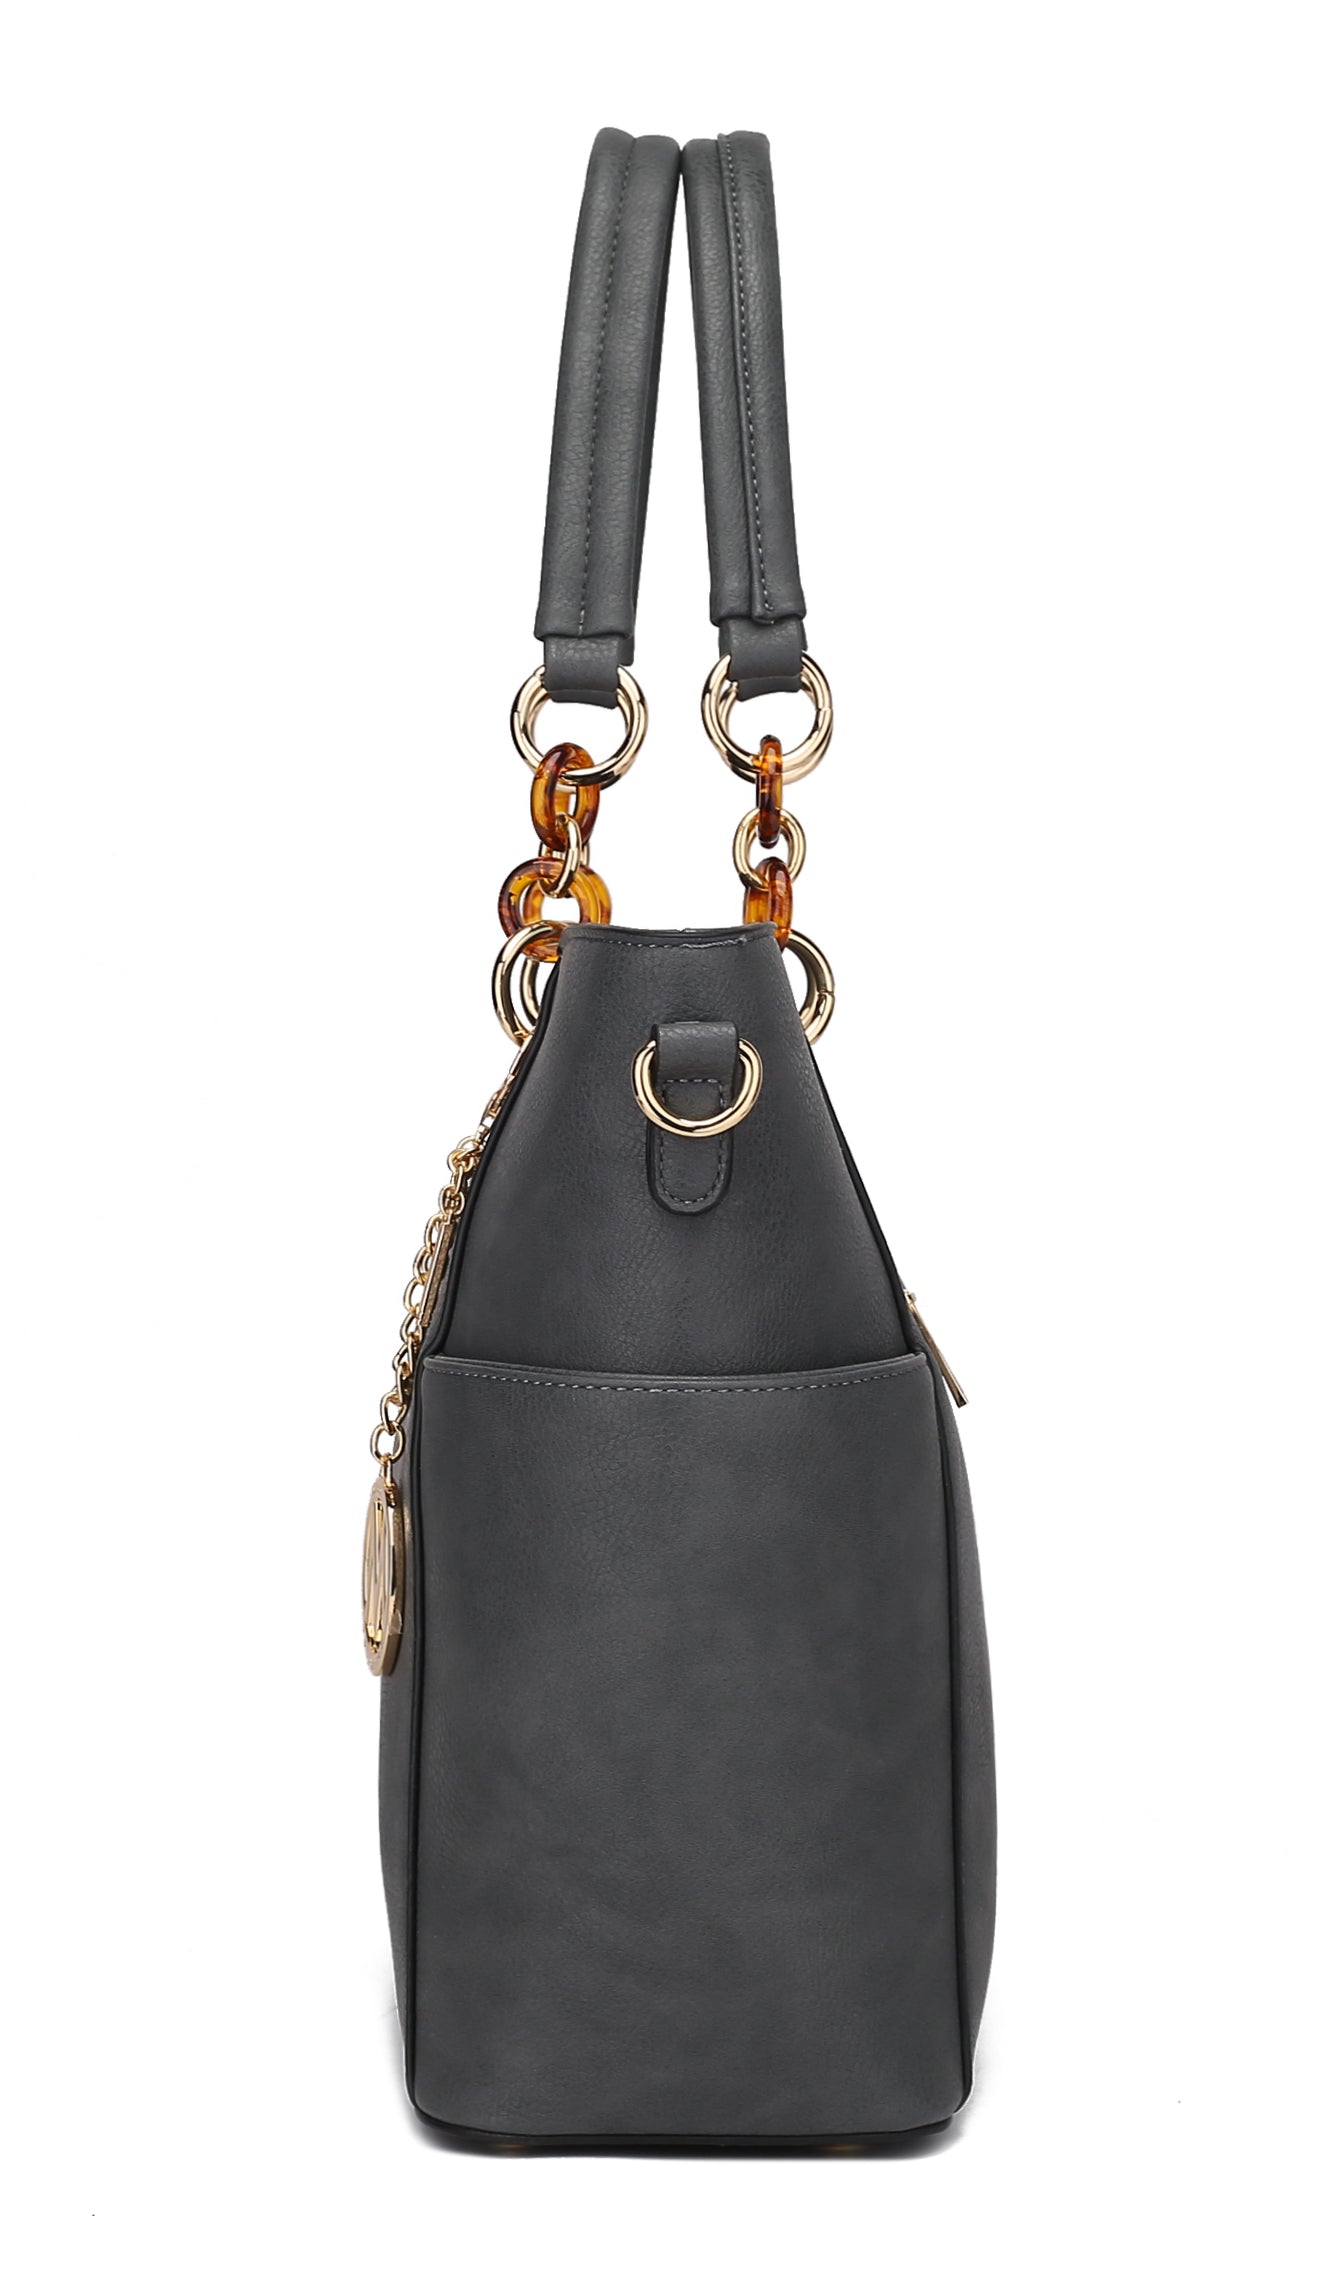 A Bonita Tote Handbag & Wallet Set Vegan Leather Women by Pink Orpheus, with a chain handle.